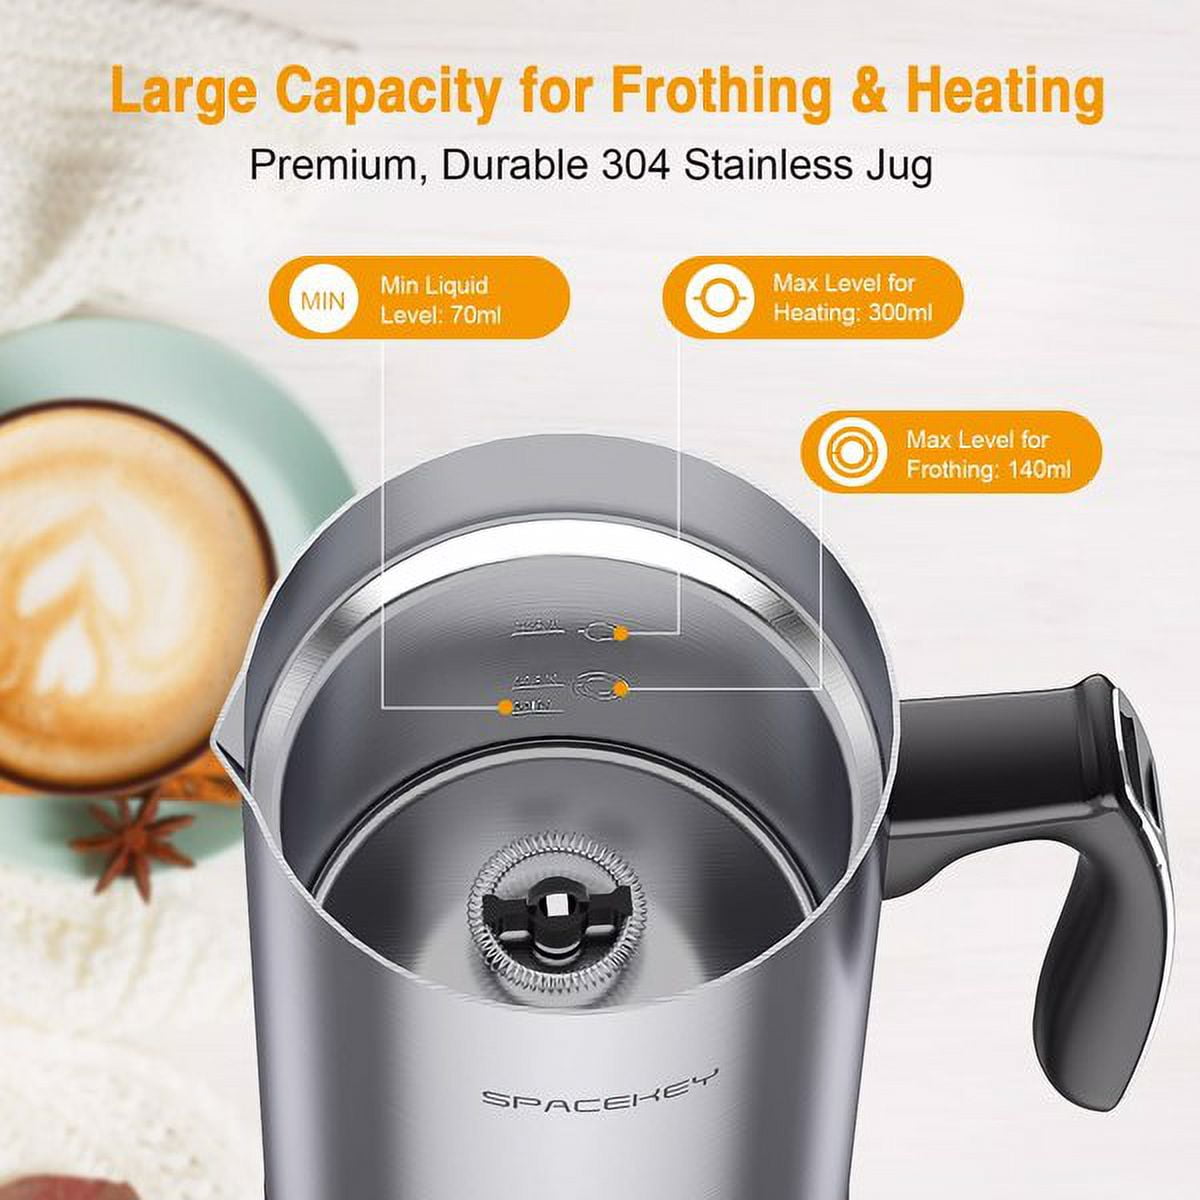 Spacekey 4-in-1 Automatic Milk Frother and Steamer: Electric Hot